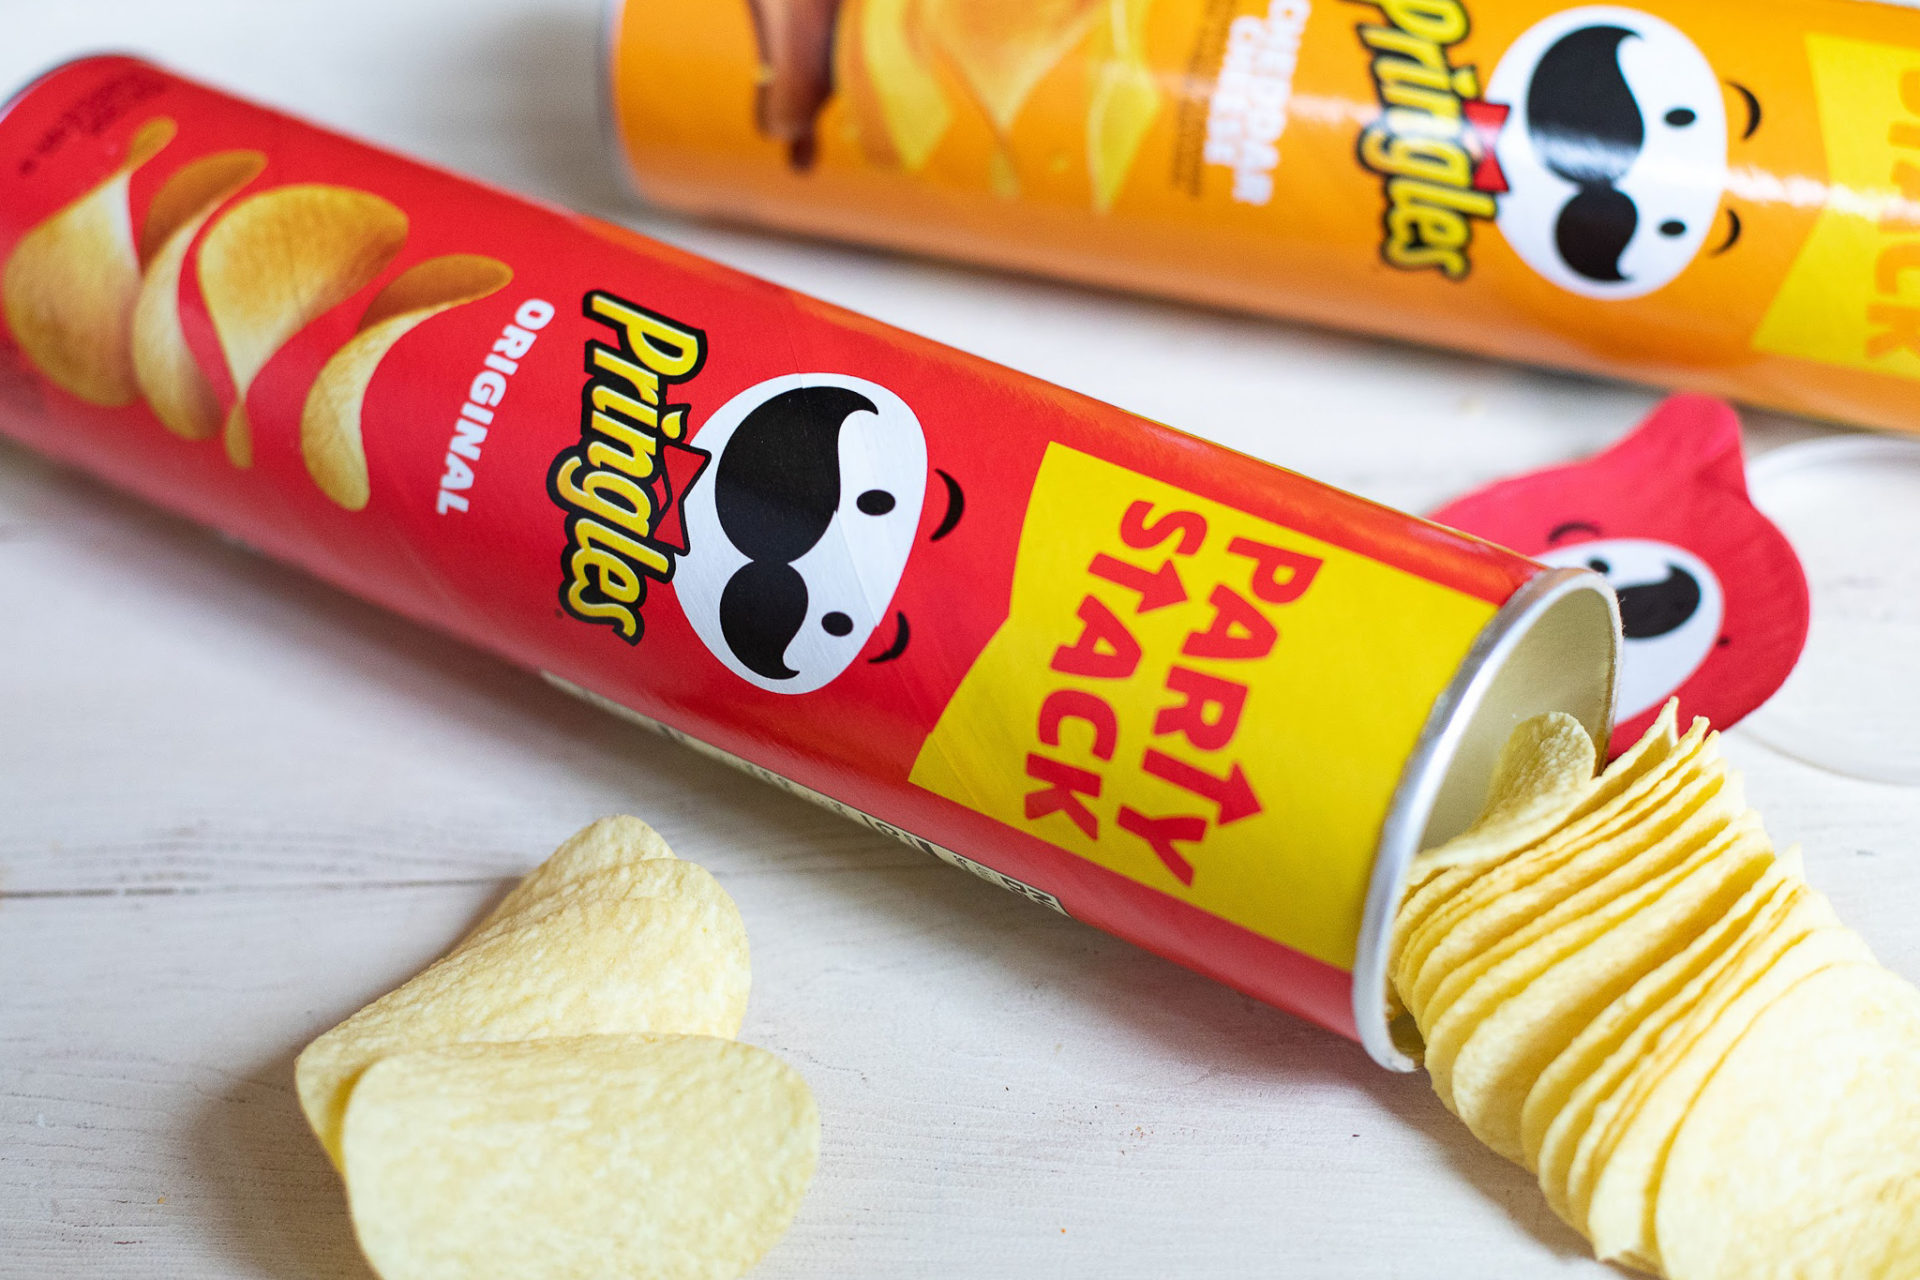 Pringles Party Stacks As Low As 99¢ At Kroger With New Ibotta